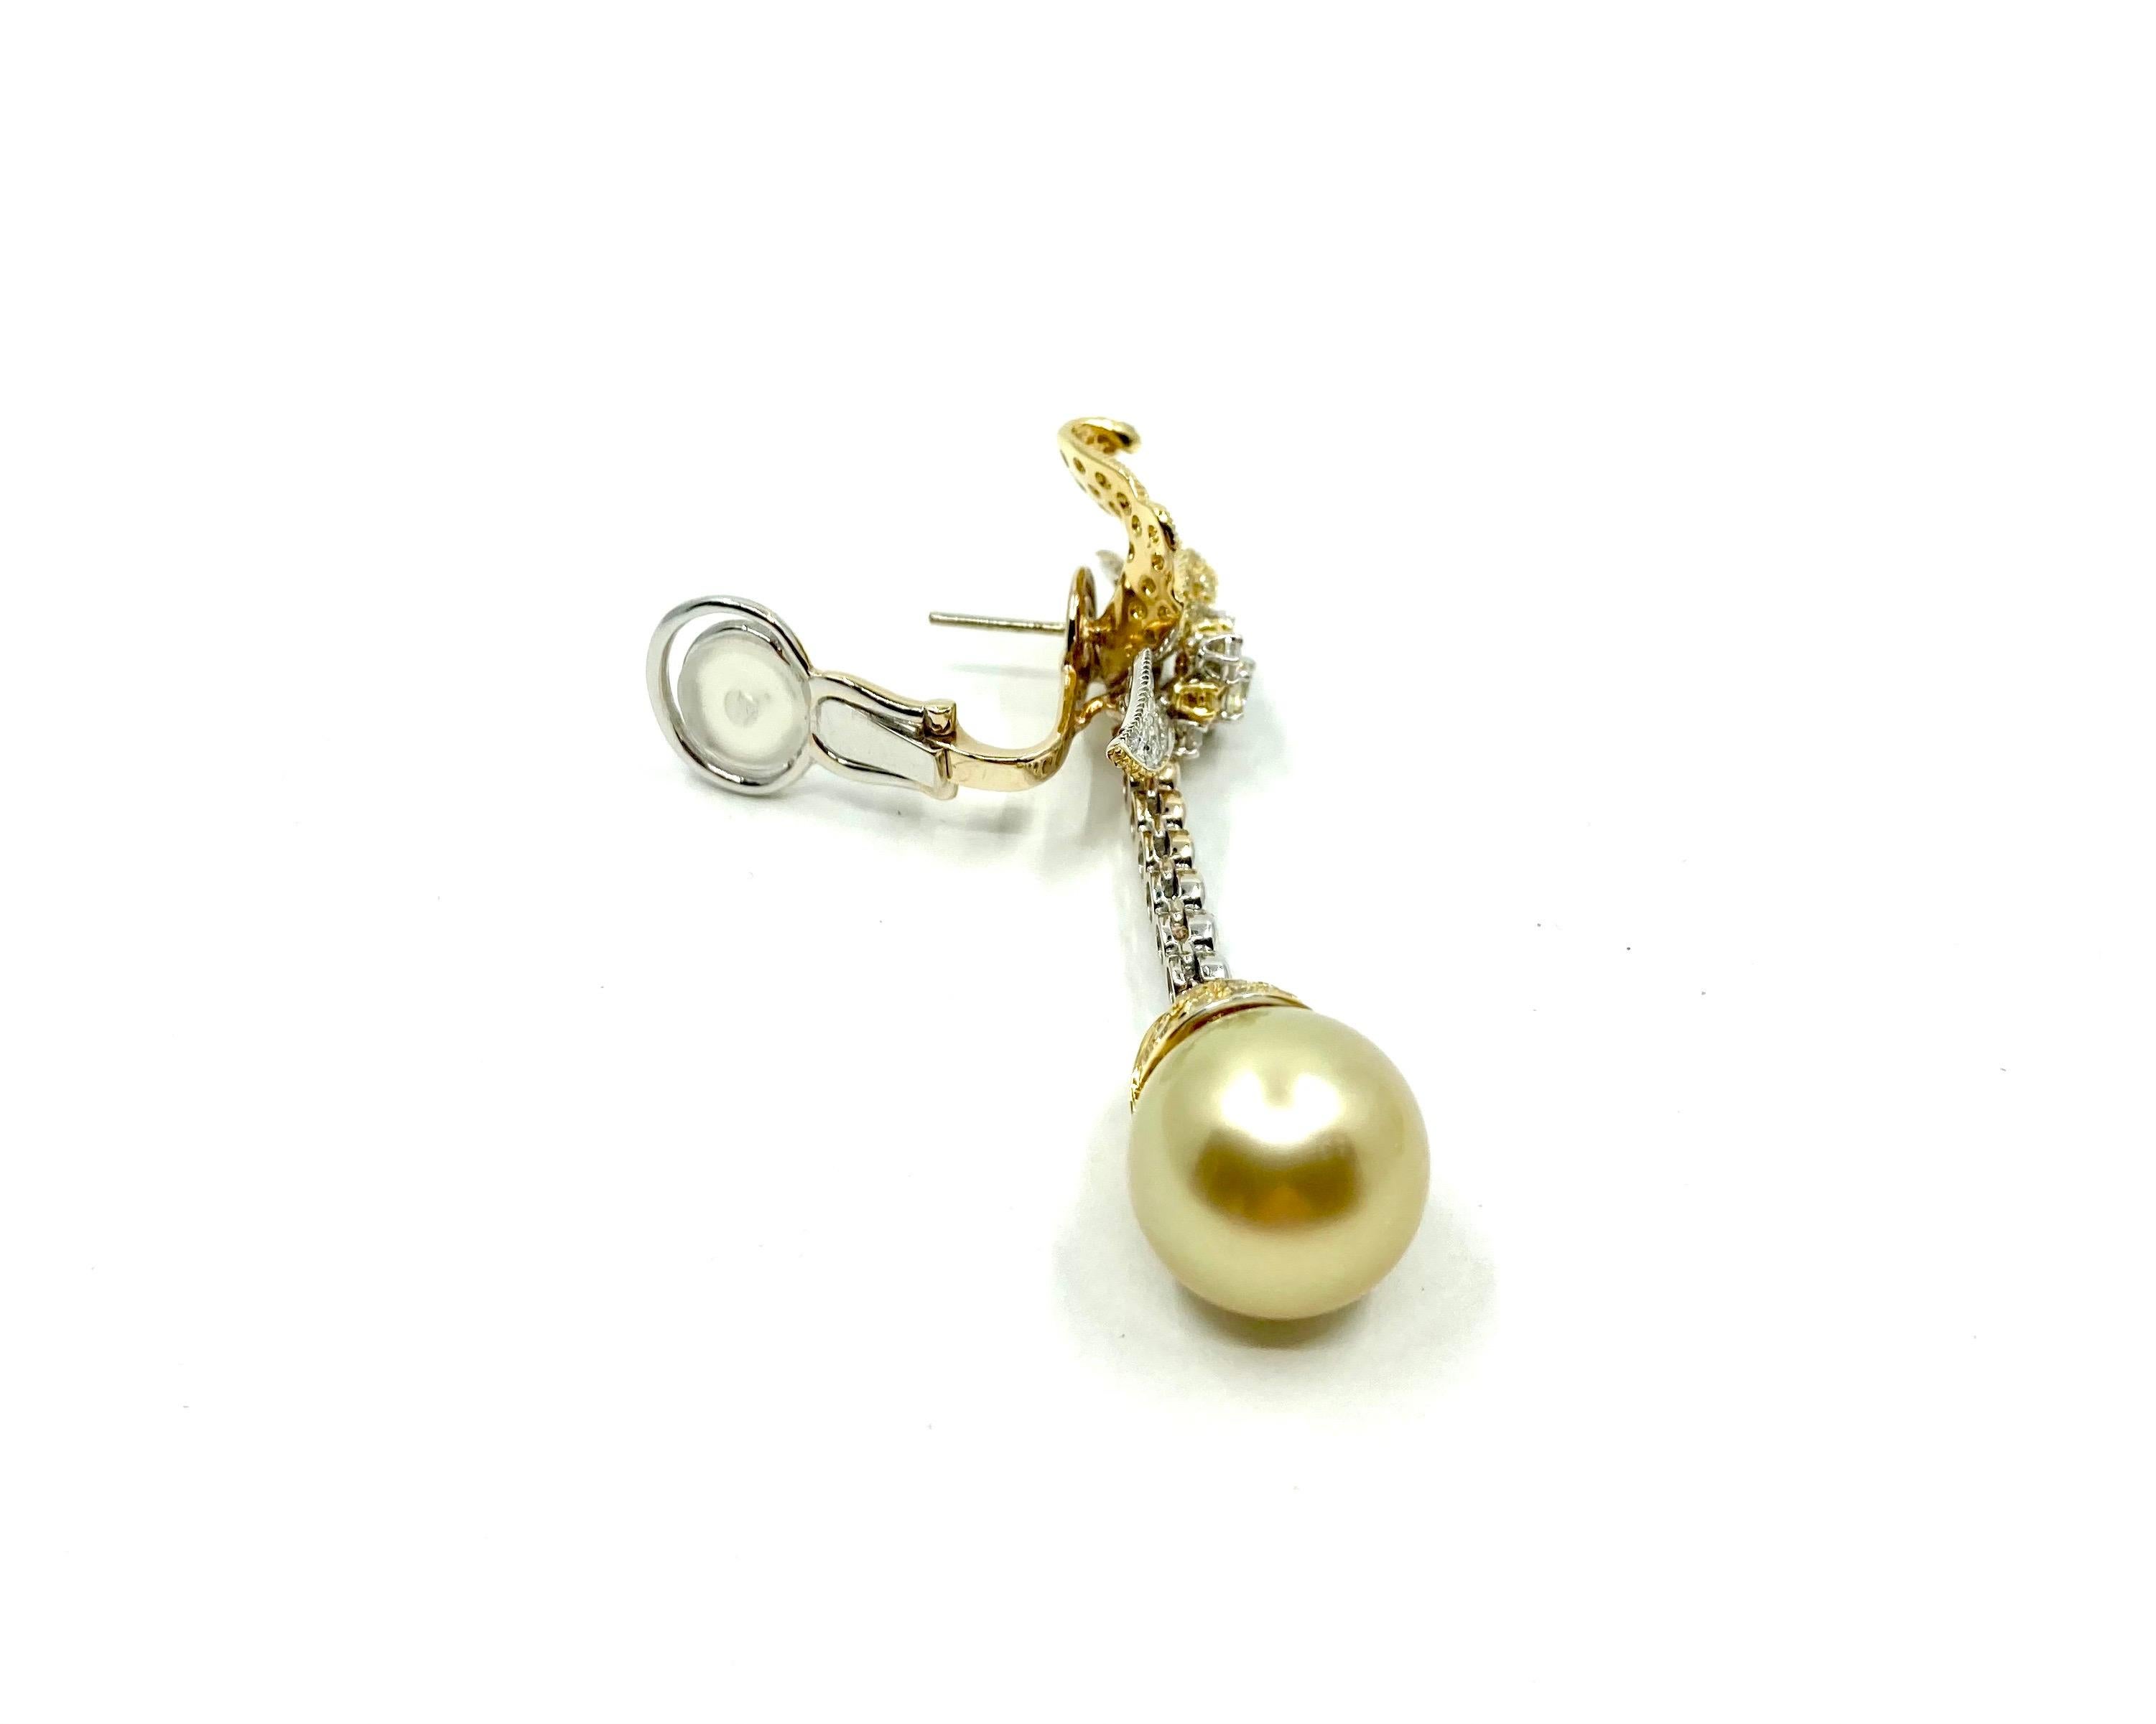 Brilliant Cut 18 Karat Gold South Sea Pearls and Diamonds Earrings For Sale